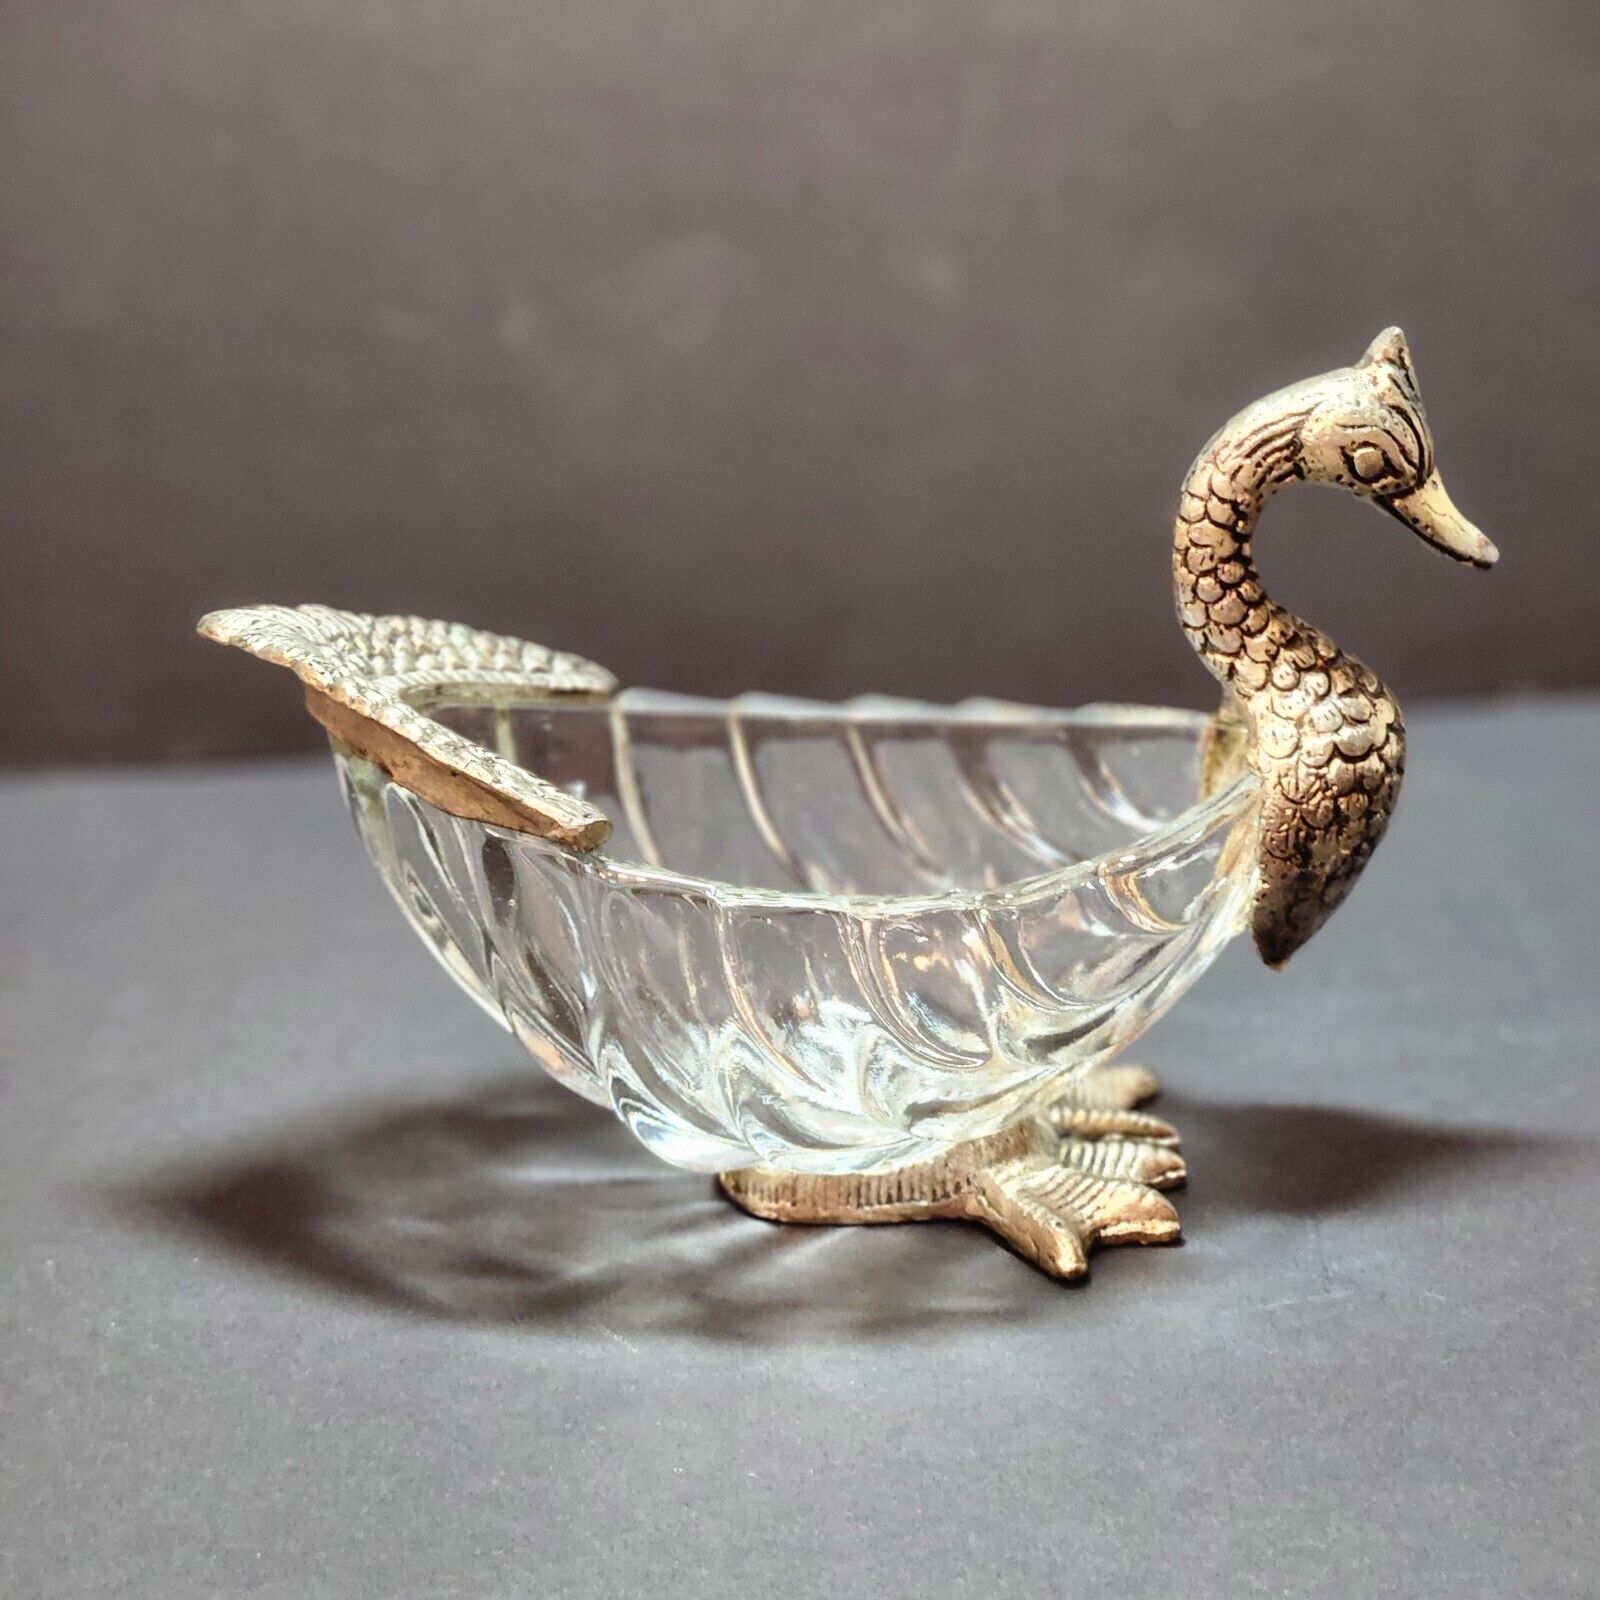 Vintage Metal And Glass Ornate Duck Candy/ Trinket Dish Figurine